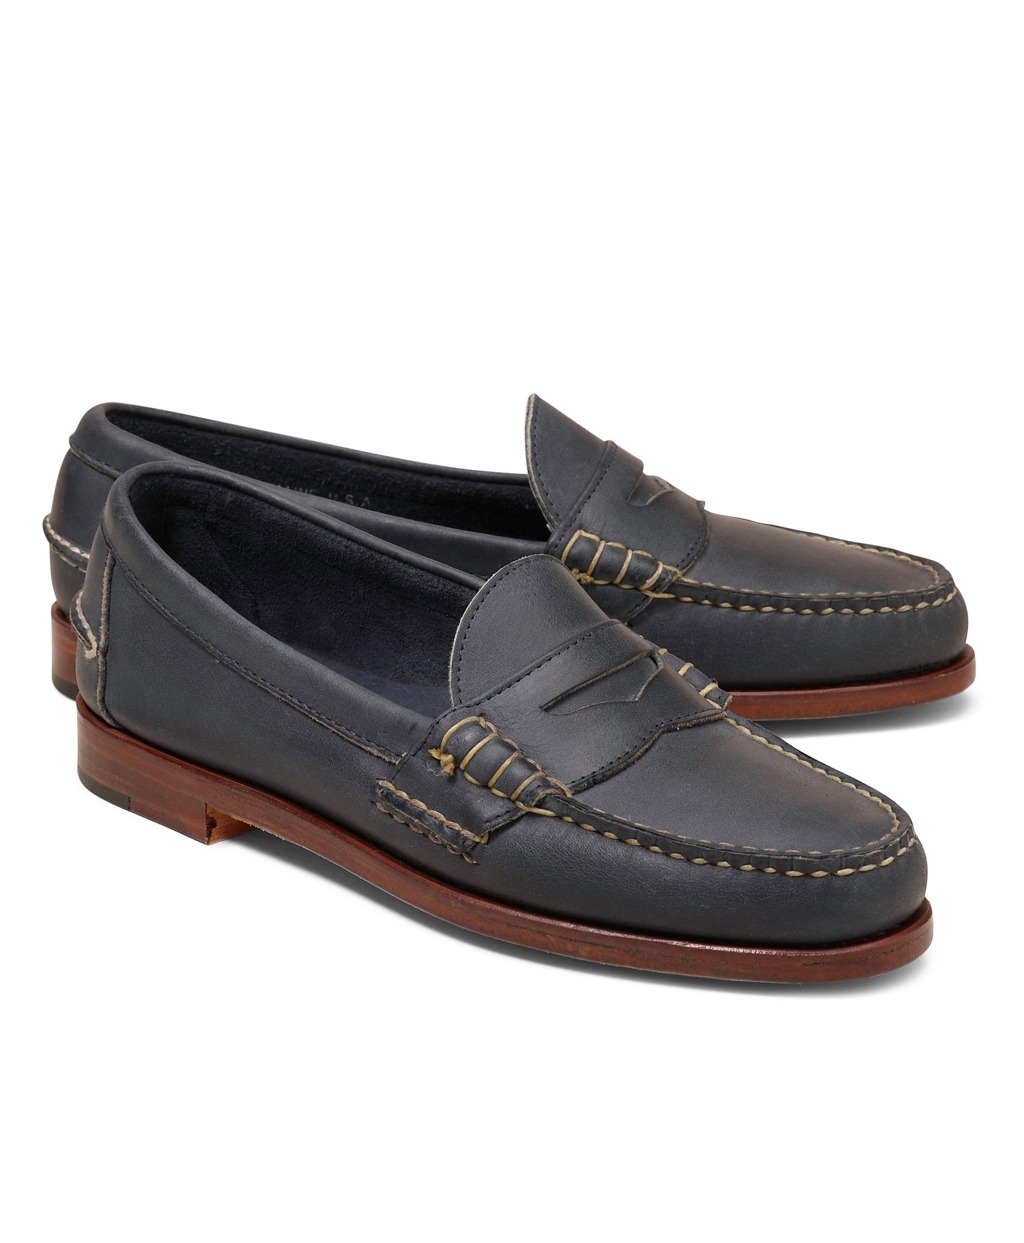 It’s On Sale: Brooks Brothers Shoes – Put This On